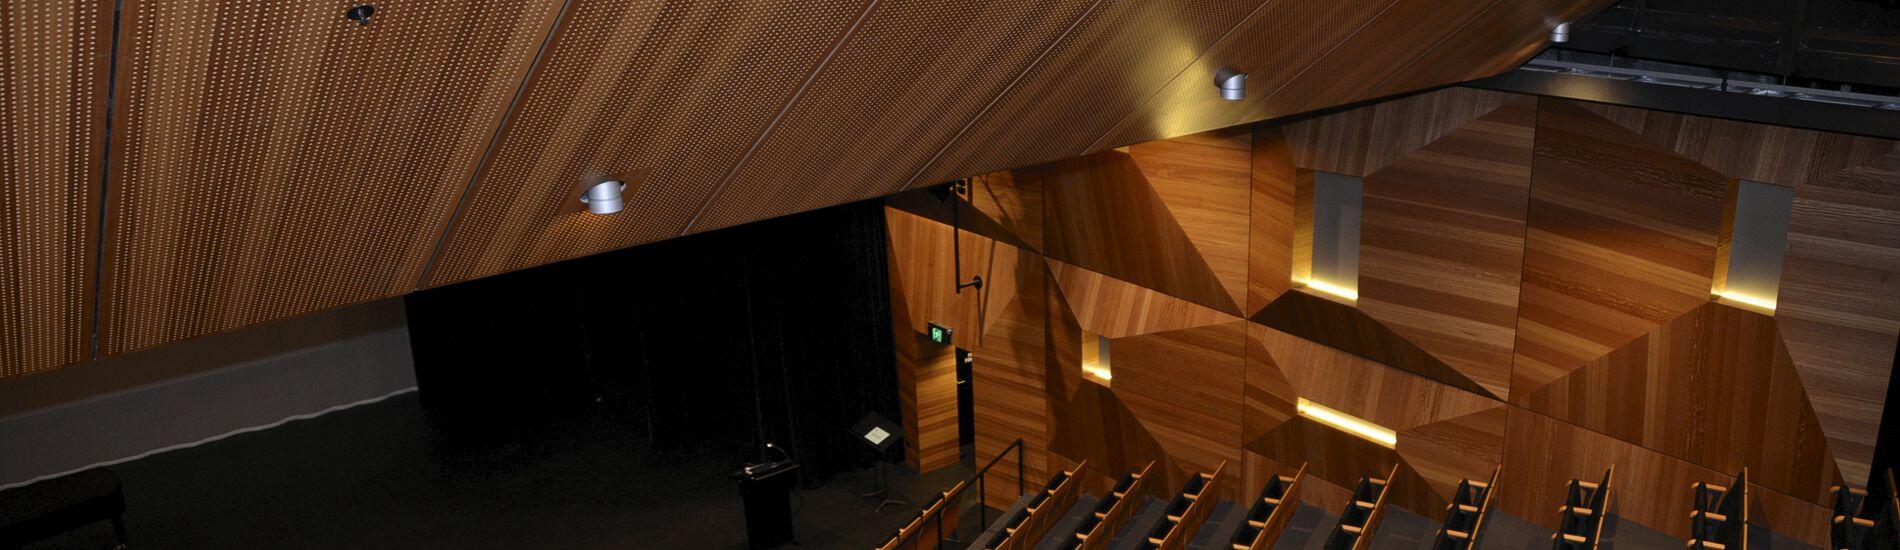 SUPACOUSTIC Acoustic and SUPALINE Decorative Natural Timber Veneer Panels Throughout School Theatre